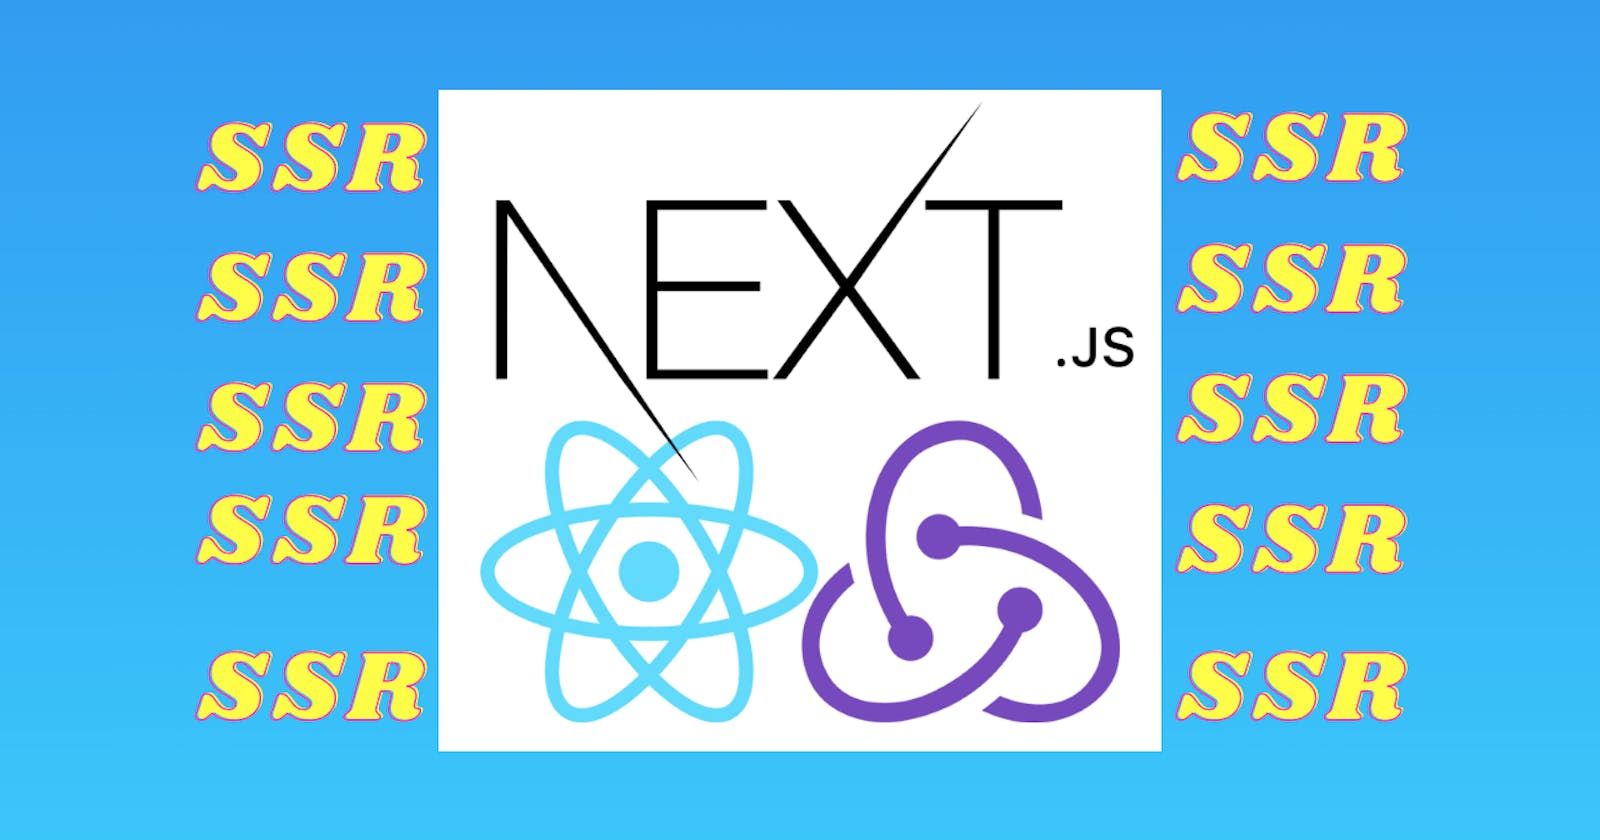 No BS Next with Redux implementation on SSR